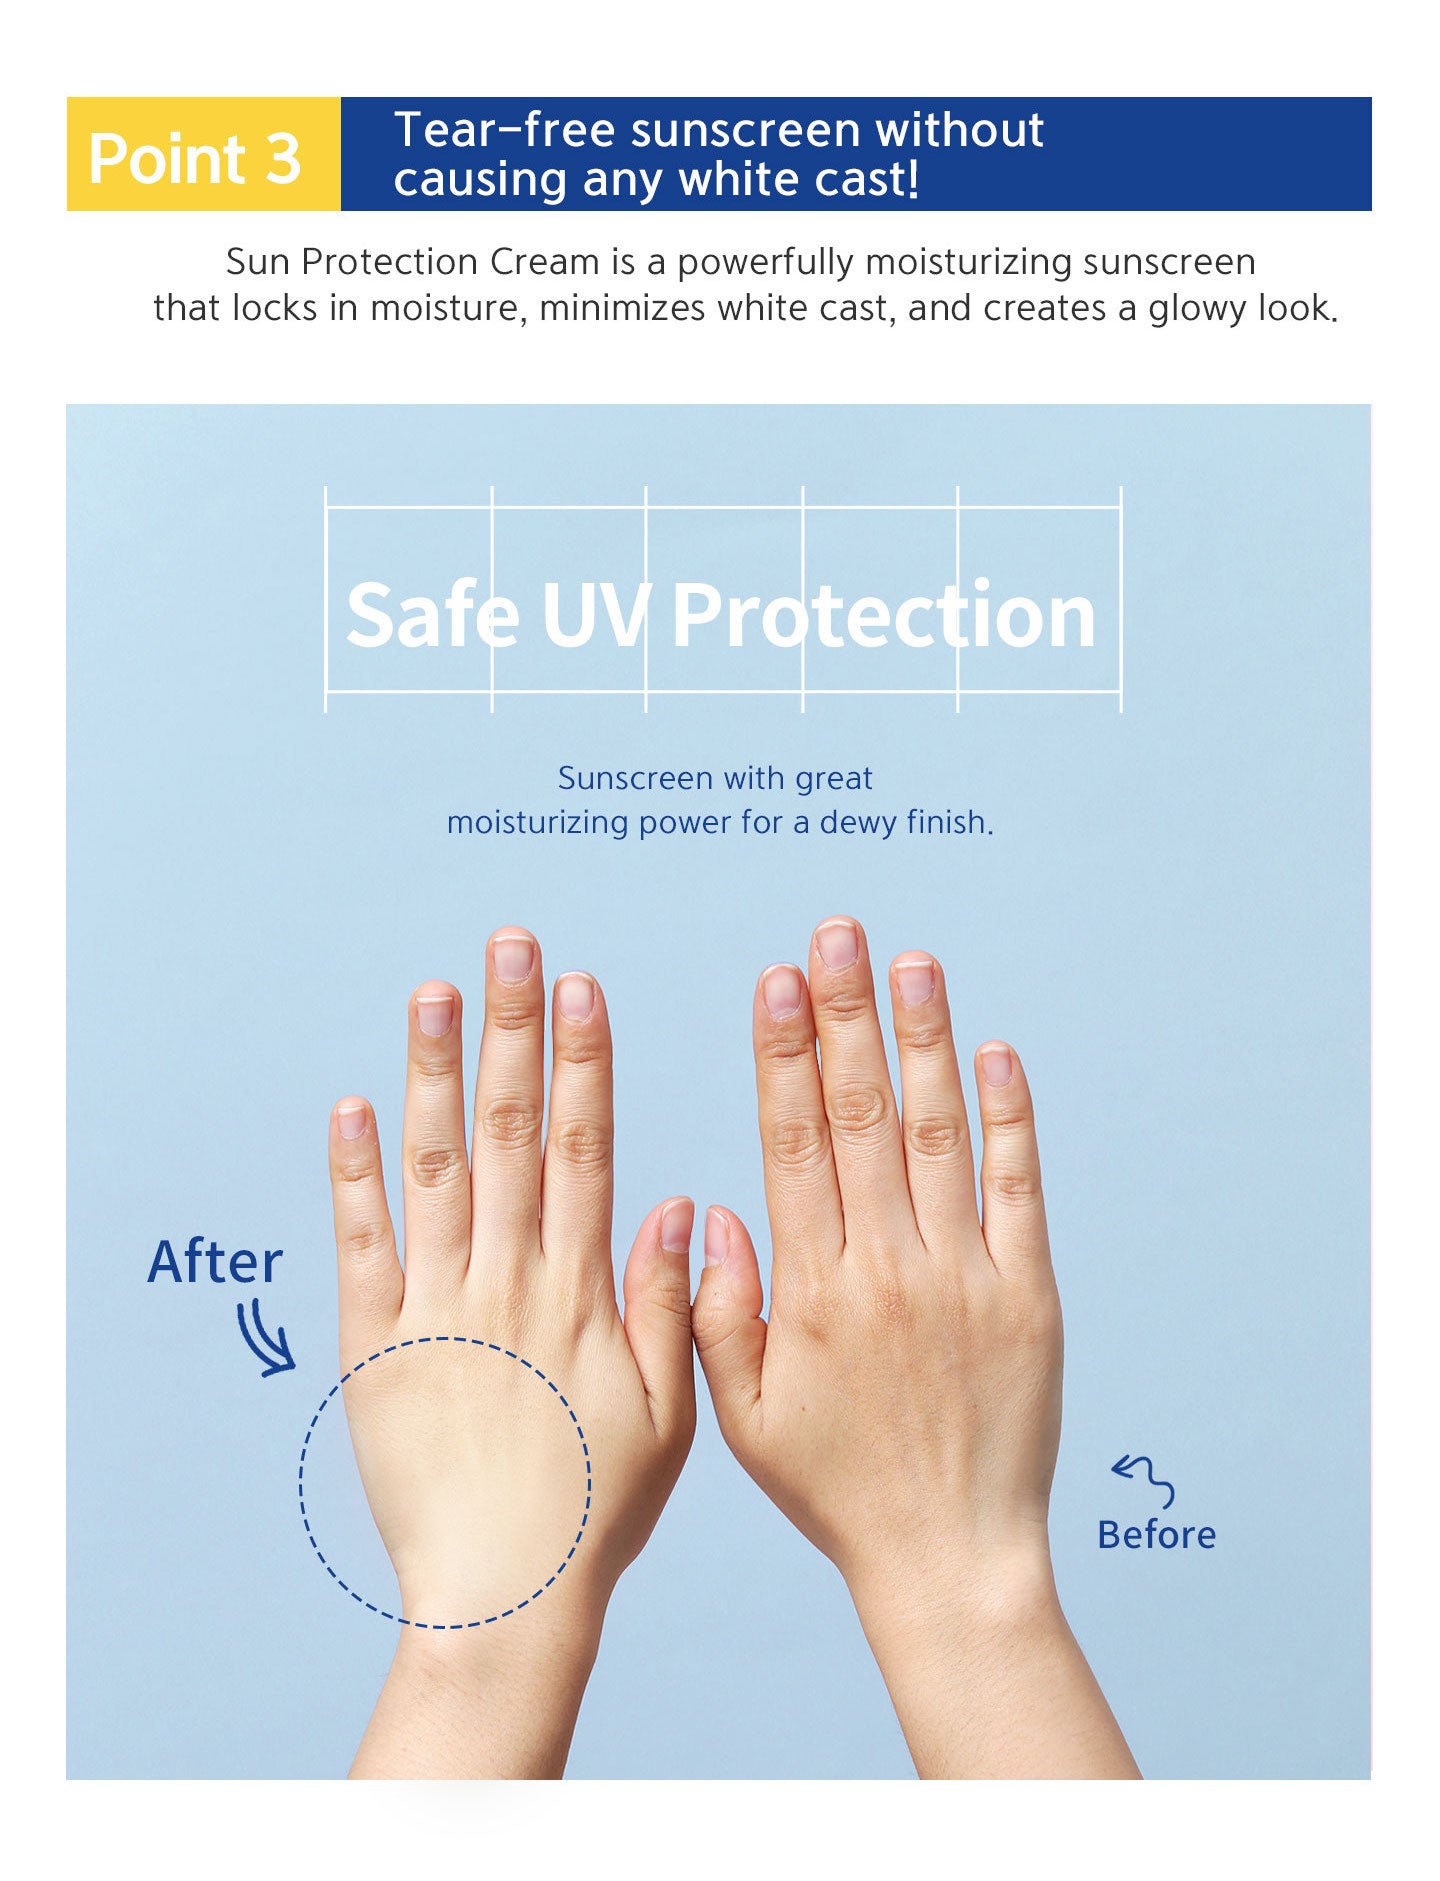 Tear-free sunscreen without causing any white cast. Sun protection cream is a powerfully moisturizing sunscreen that locks in moisture, minimizes white cast, and creates a glowy look.